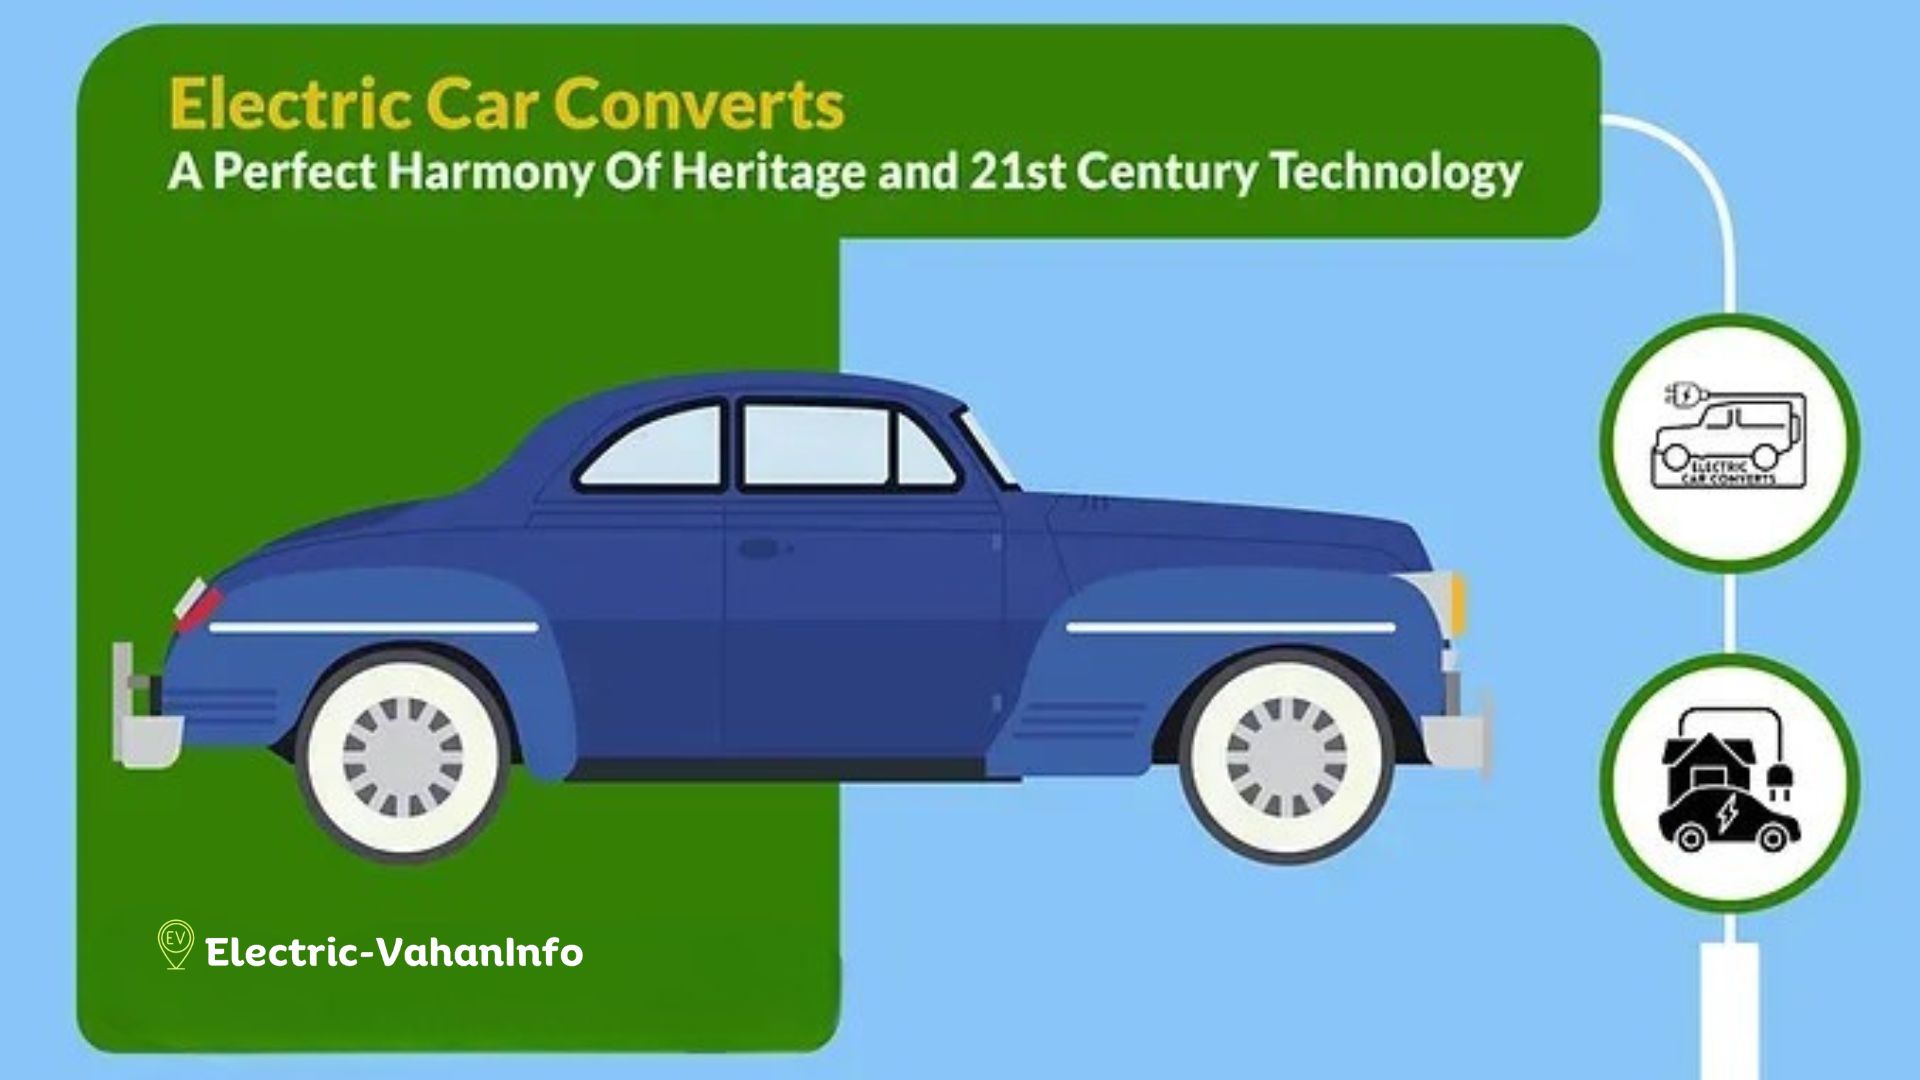 https://electric-vahaninfo.com/top-electric-car-conversion-kits-with-price-companies-in-india/